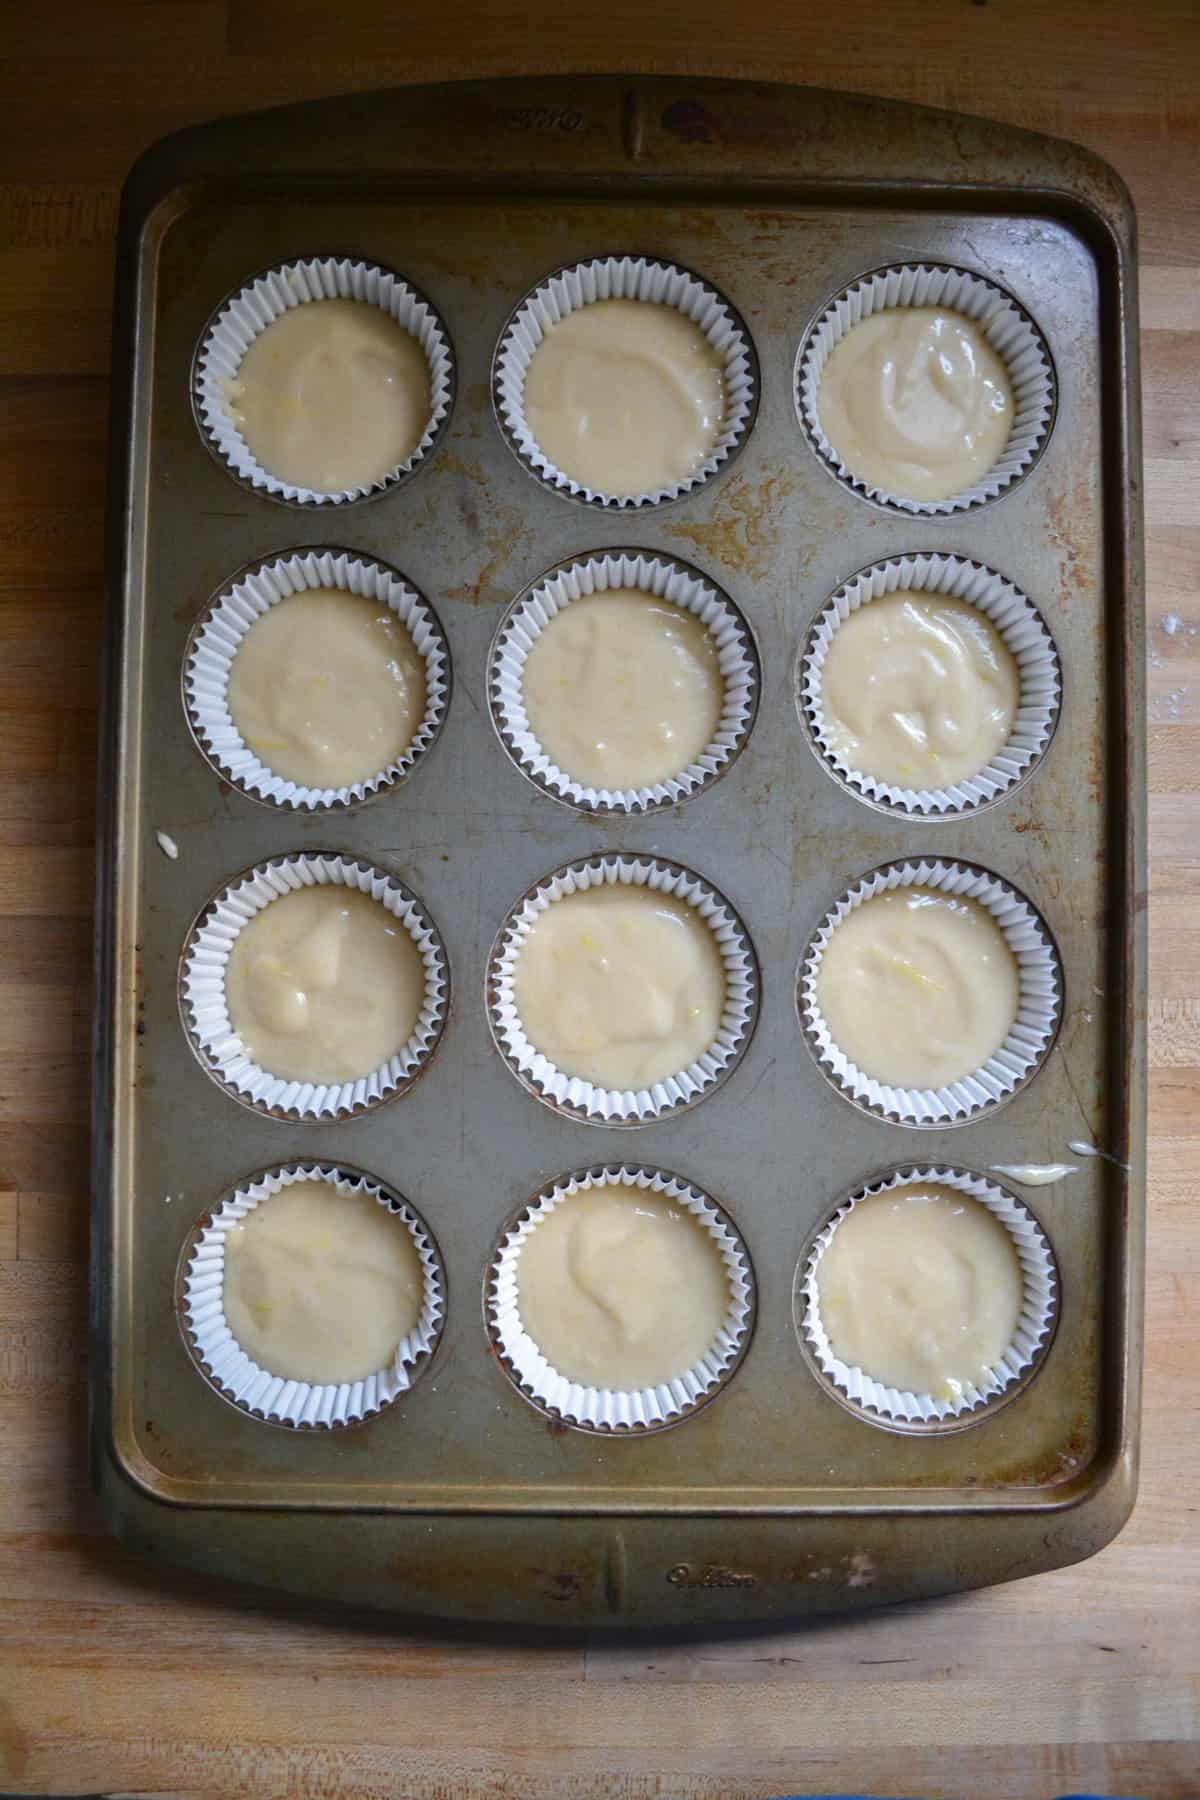 Batter in a cupcake tin ready to be baked